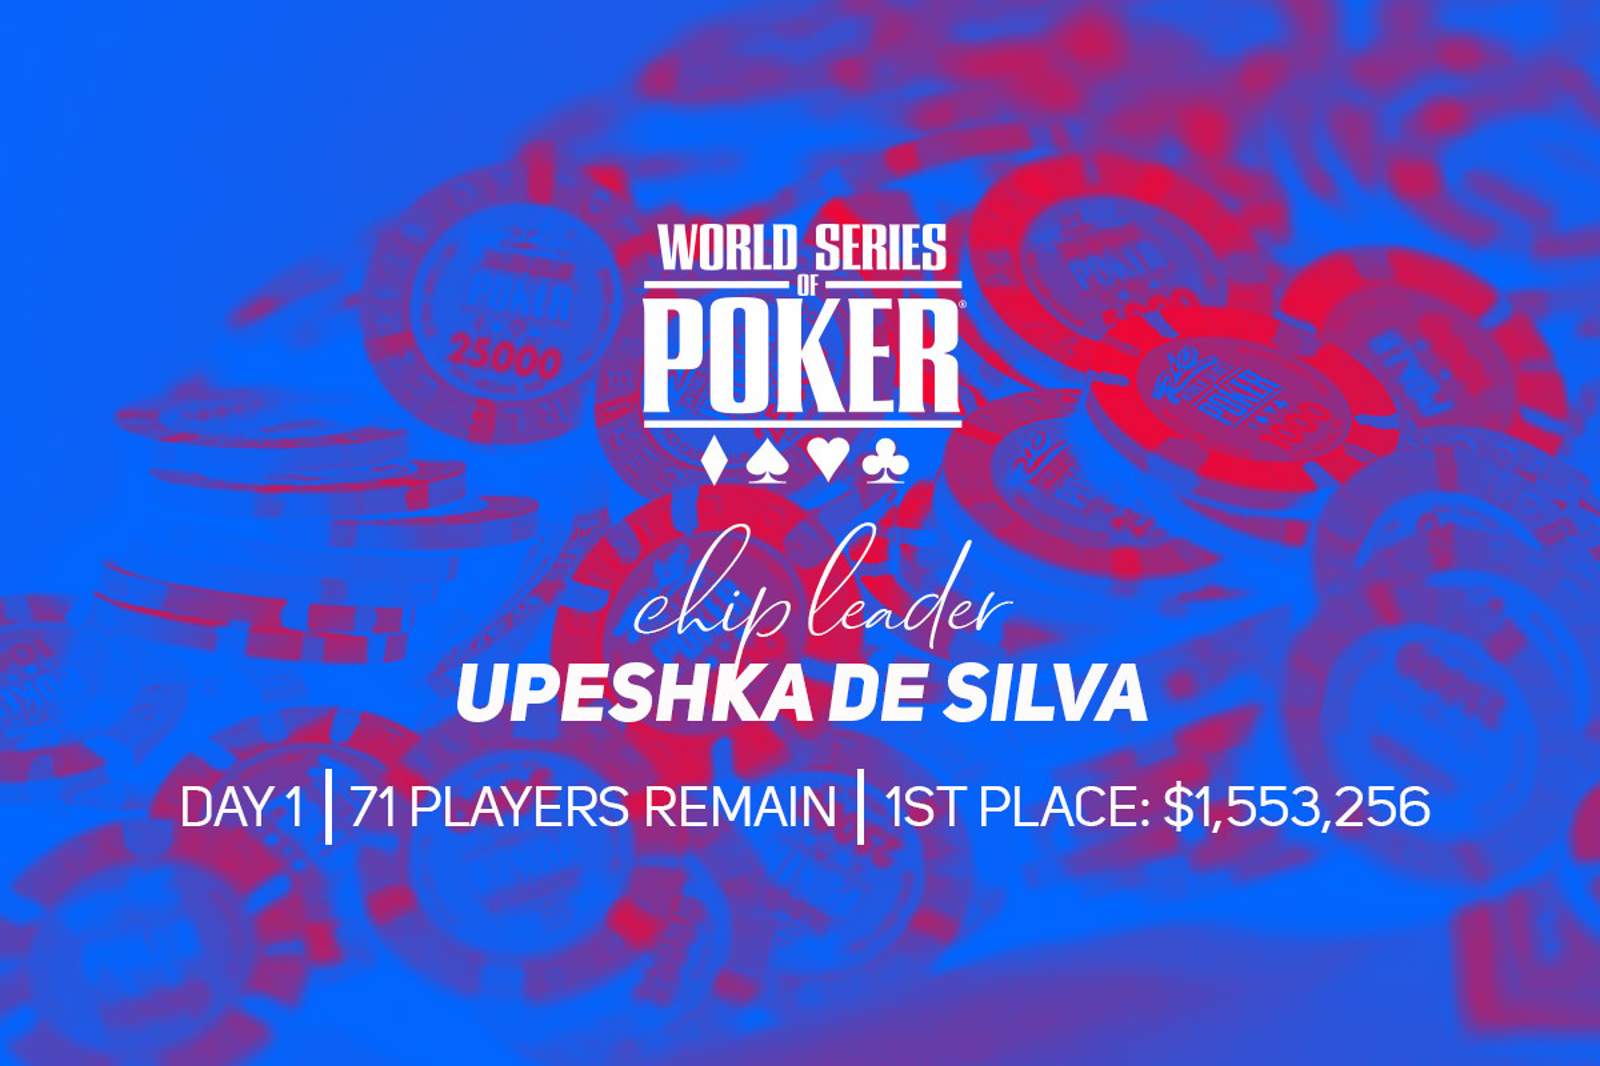 Upeshka De Silva Leads 71 Players on Day 1 of WSOP Main Event - $1.55 Million for First